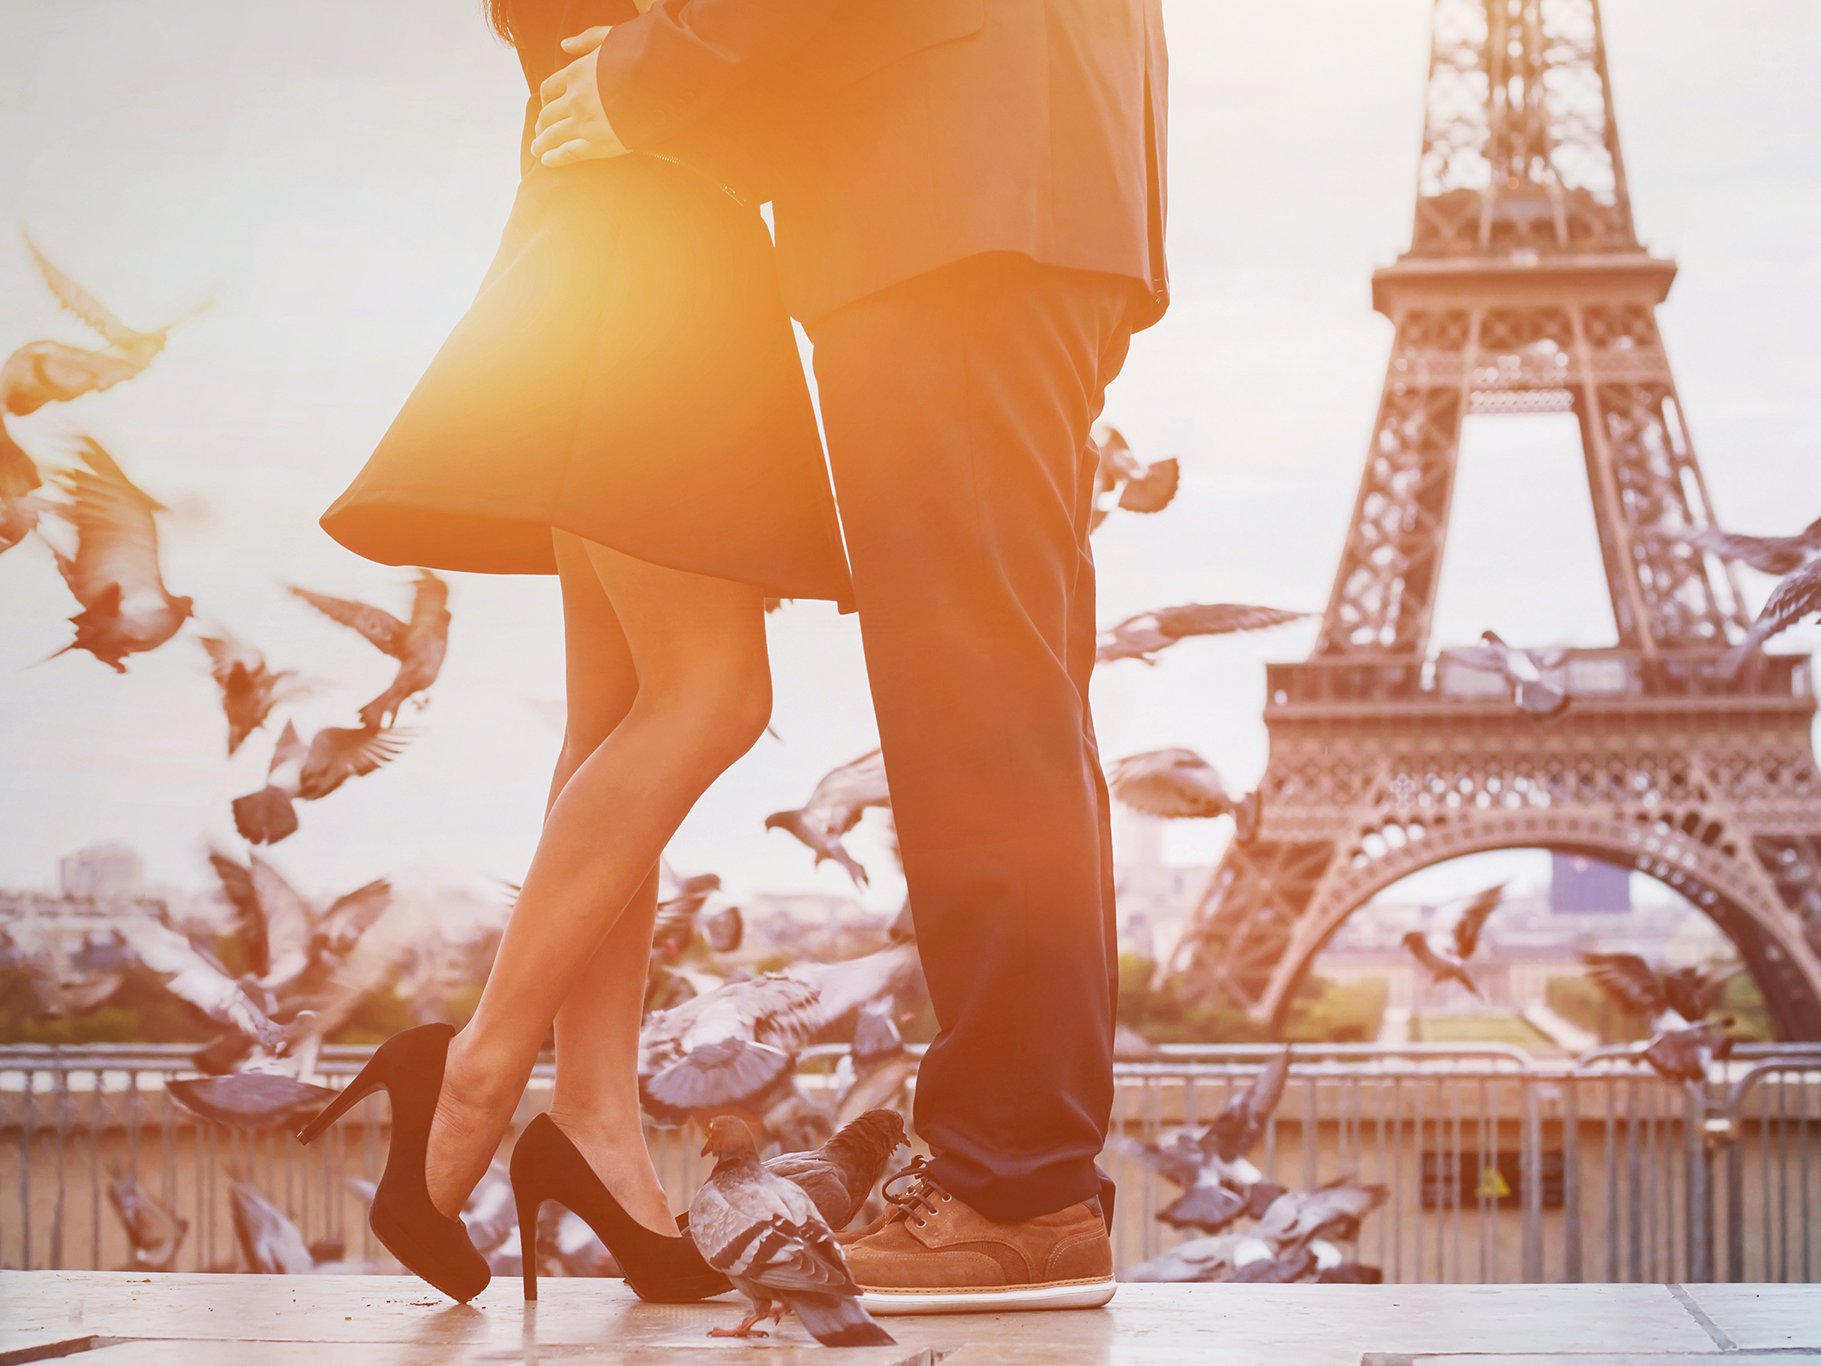 The Eiffel Tower remains the most popular spot in the city of romance.